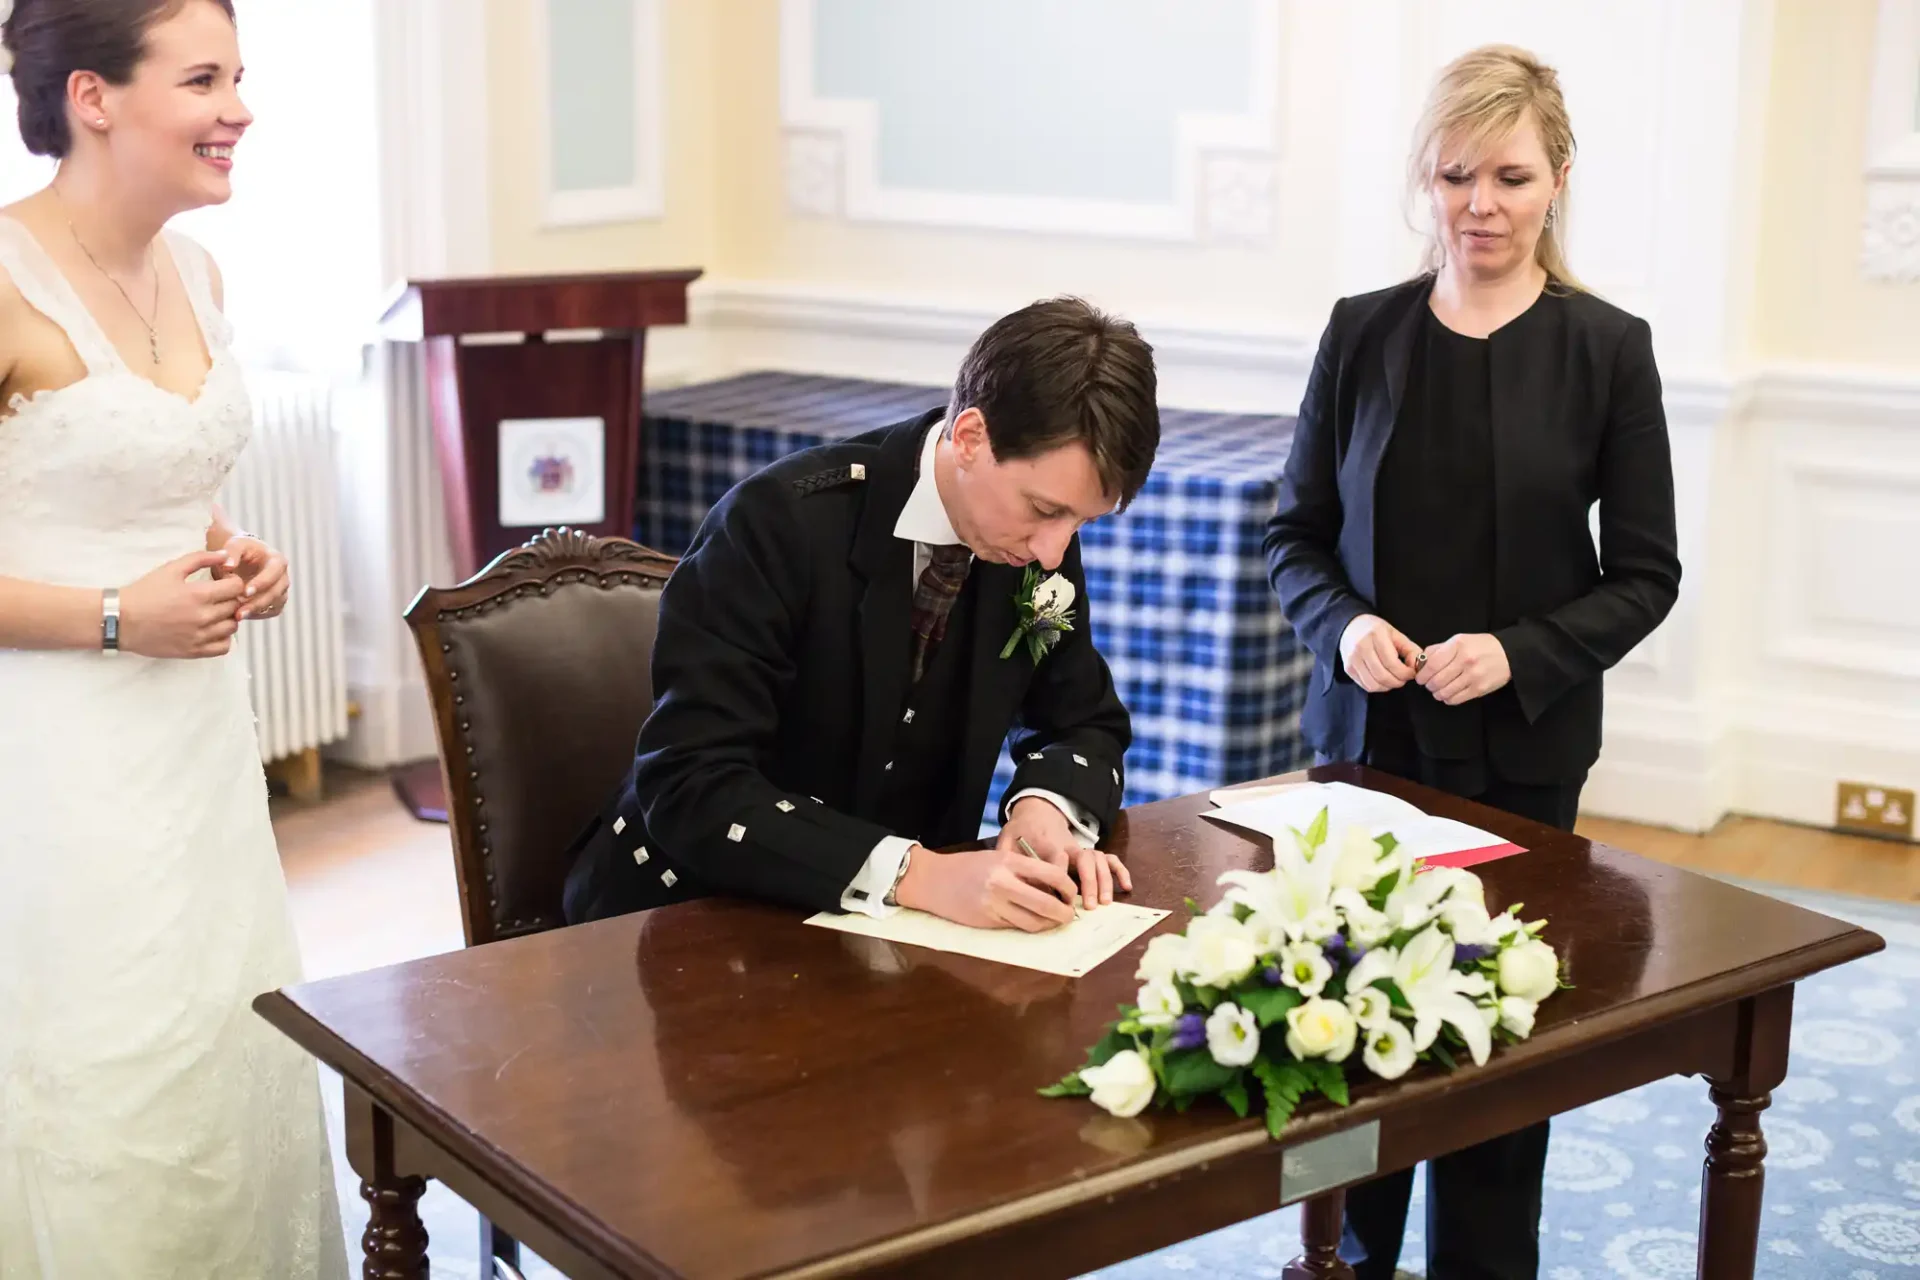 A groom in a dark suit signs a document at a table during a wedding ceremony, under the watchful eyes of a smiling bride and an officiant.